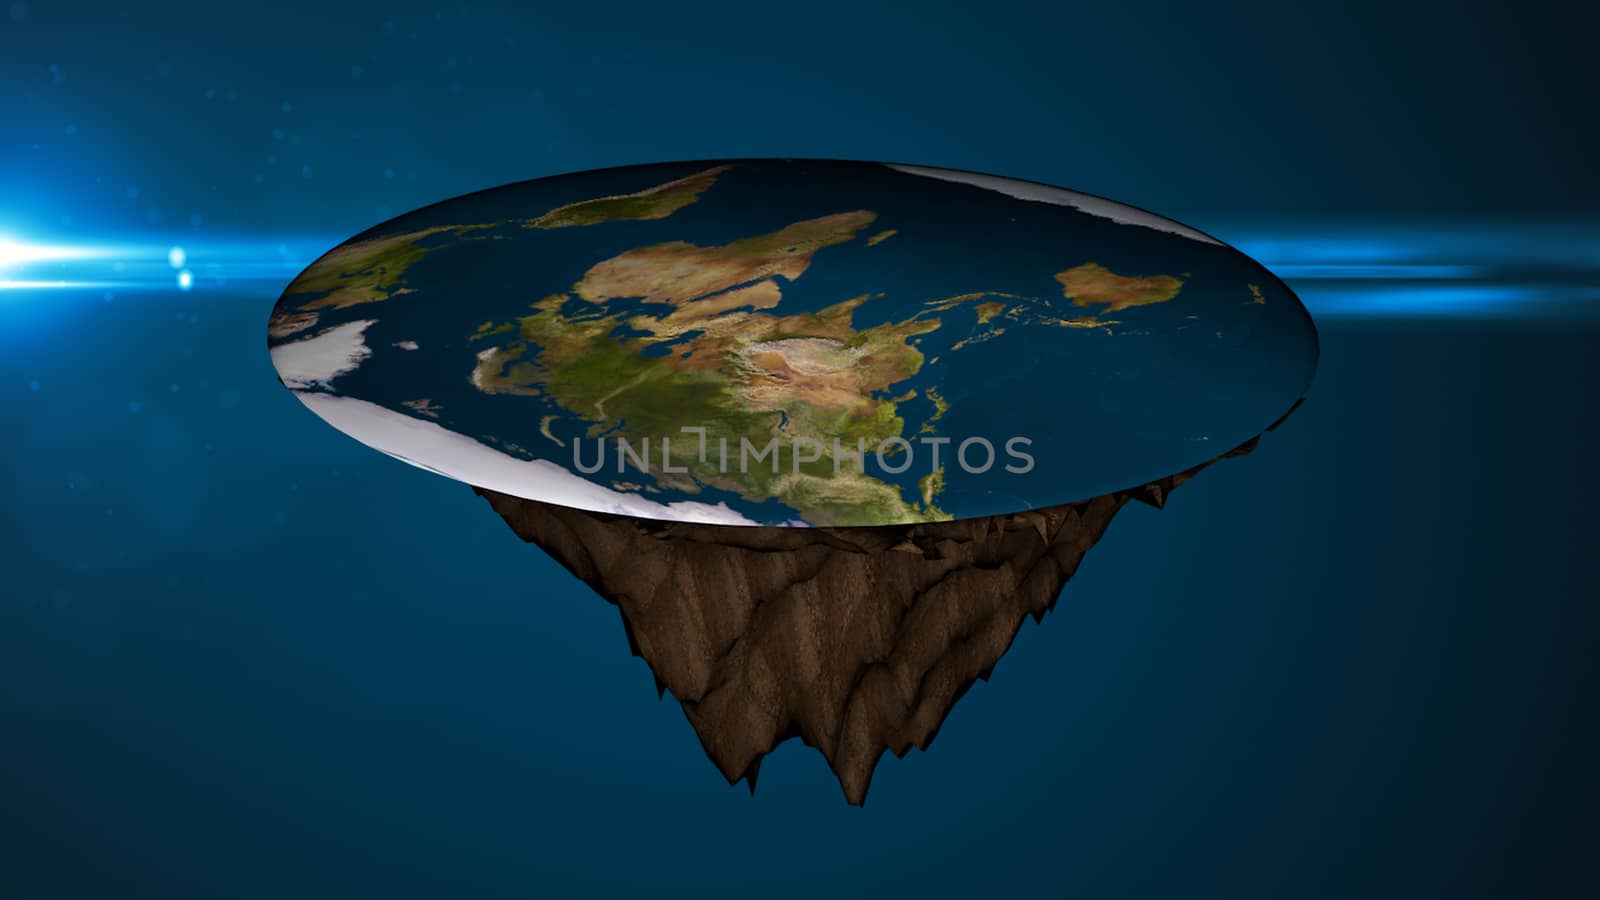 Space background with flat earth. Digital illustration by nolimit046